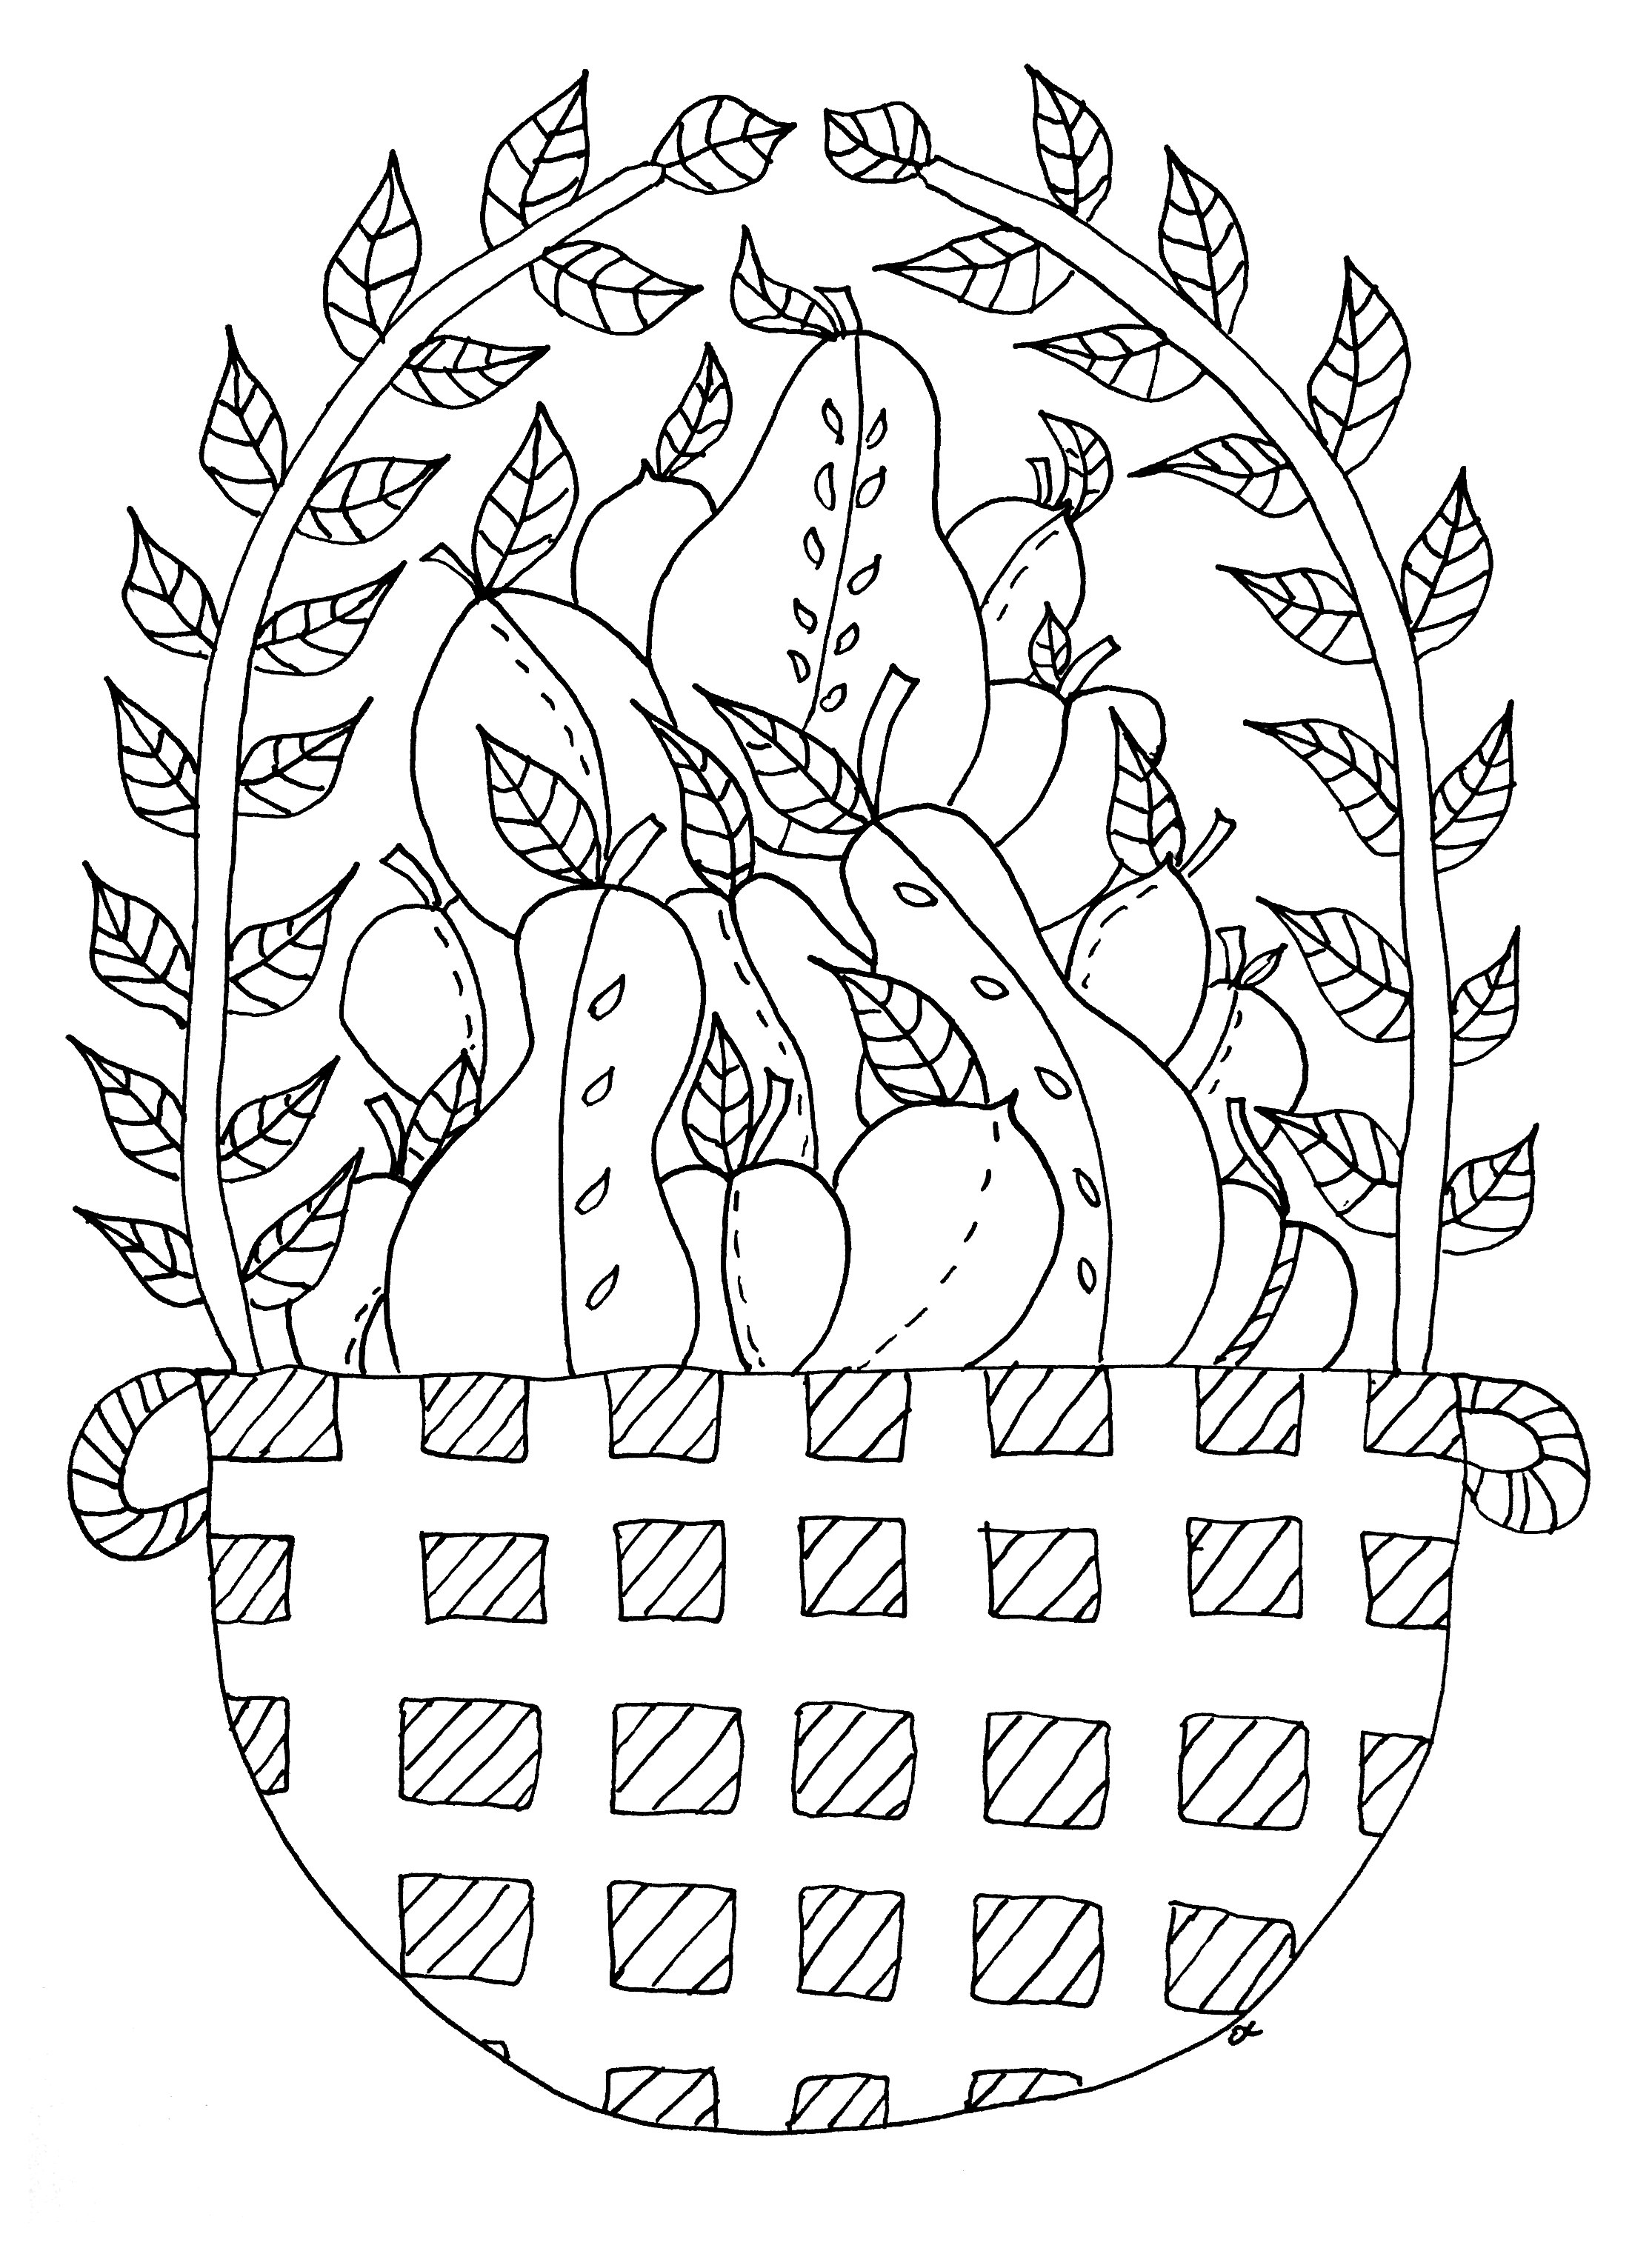 Simple Adult coloring page to download for free